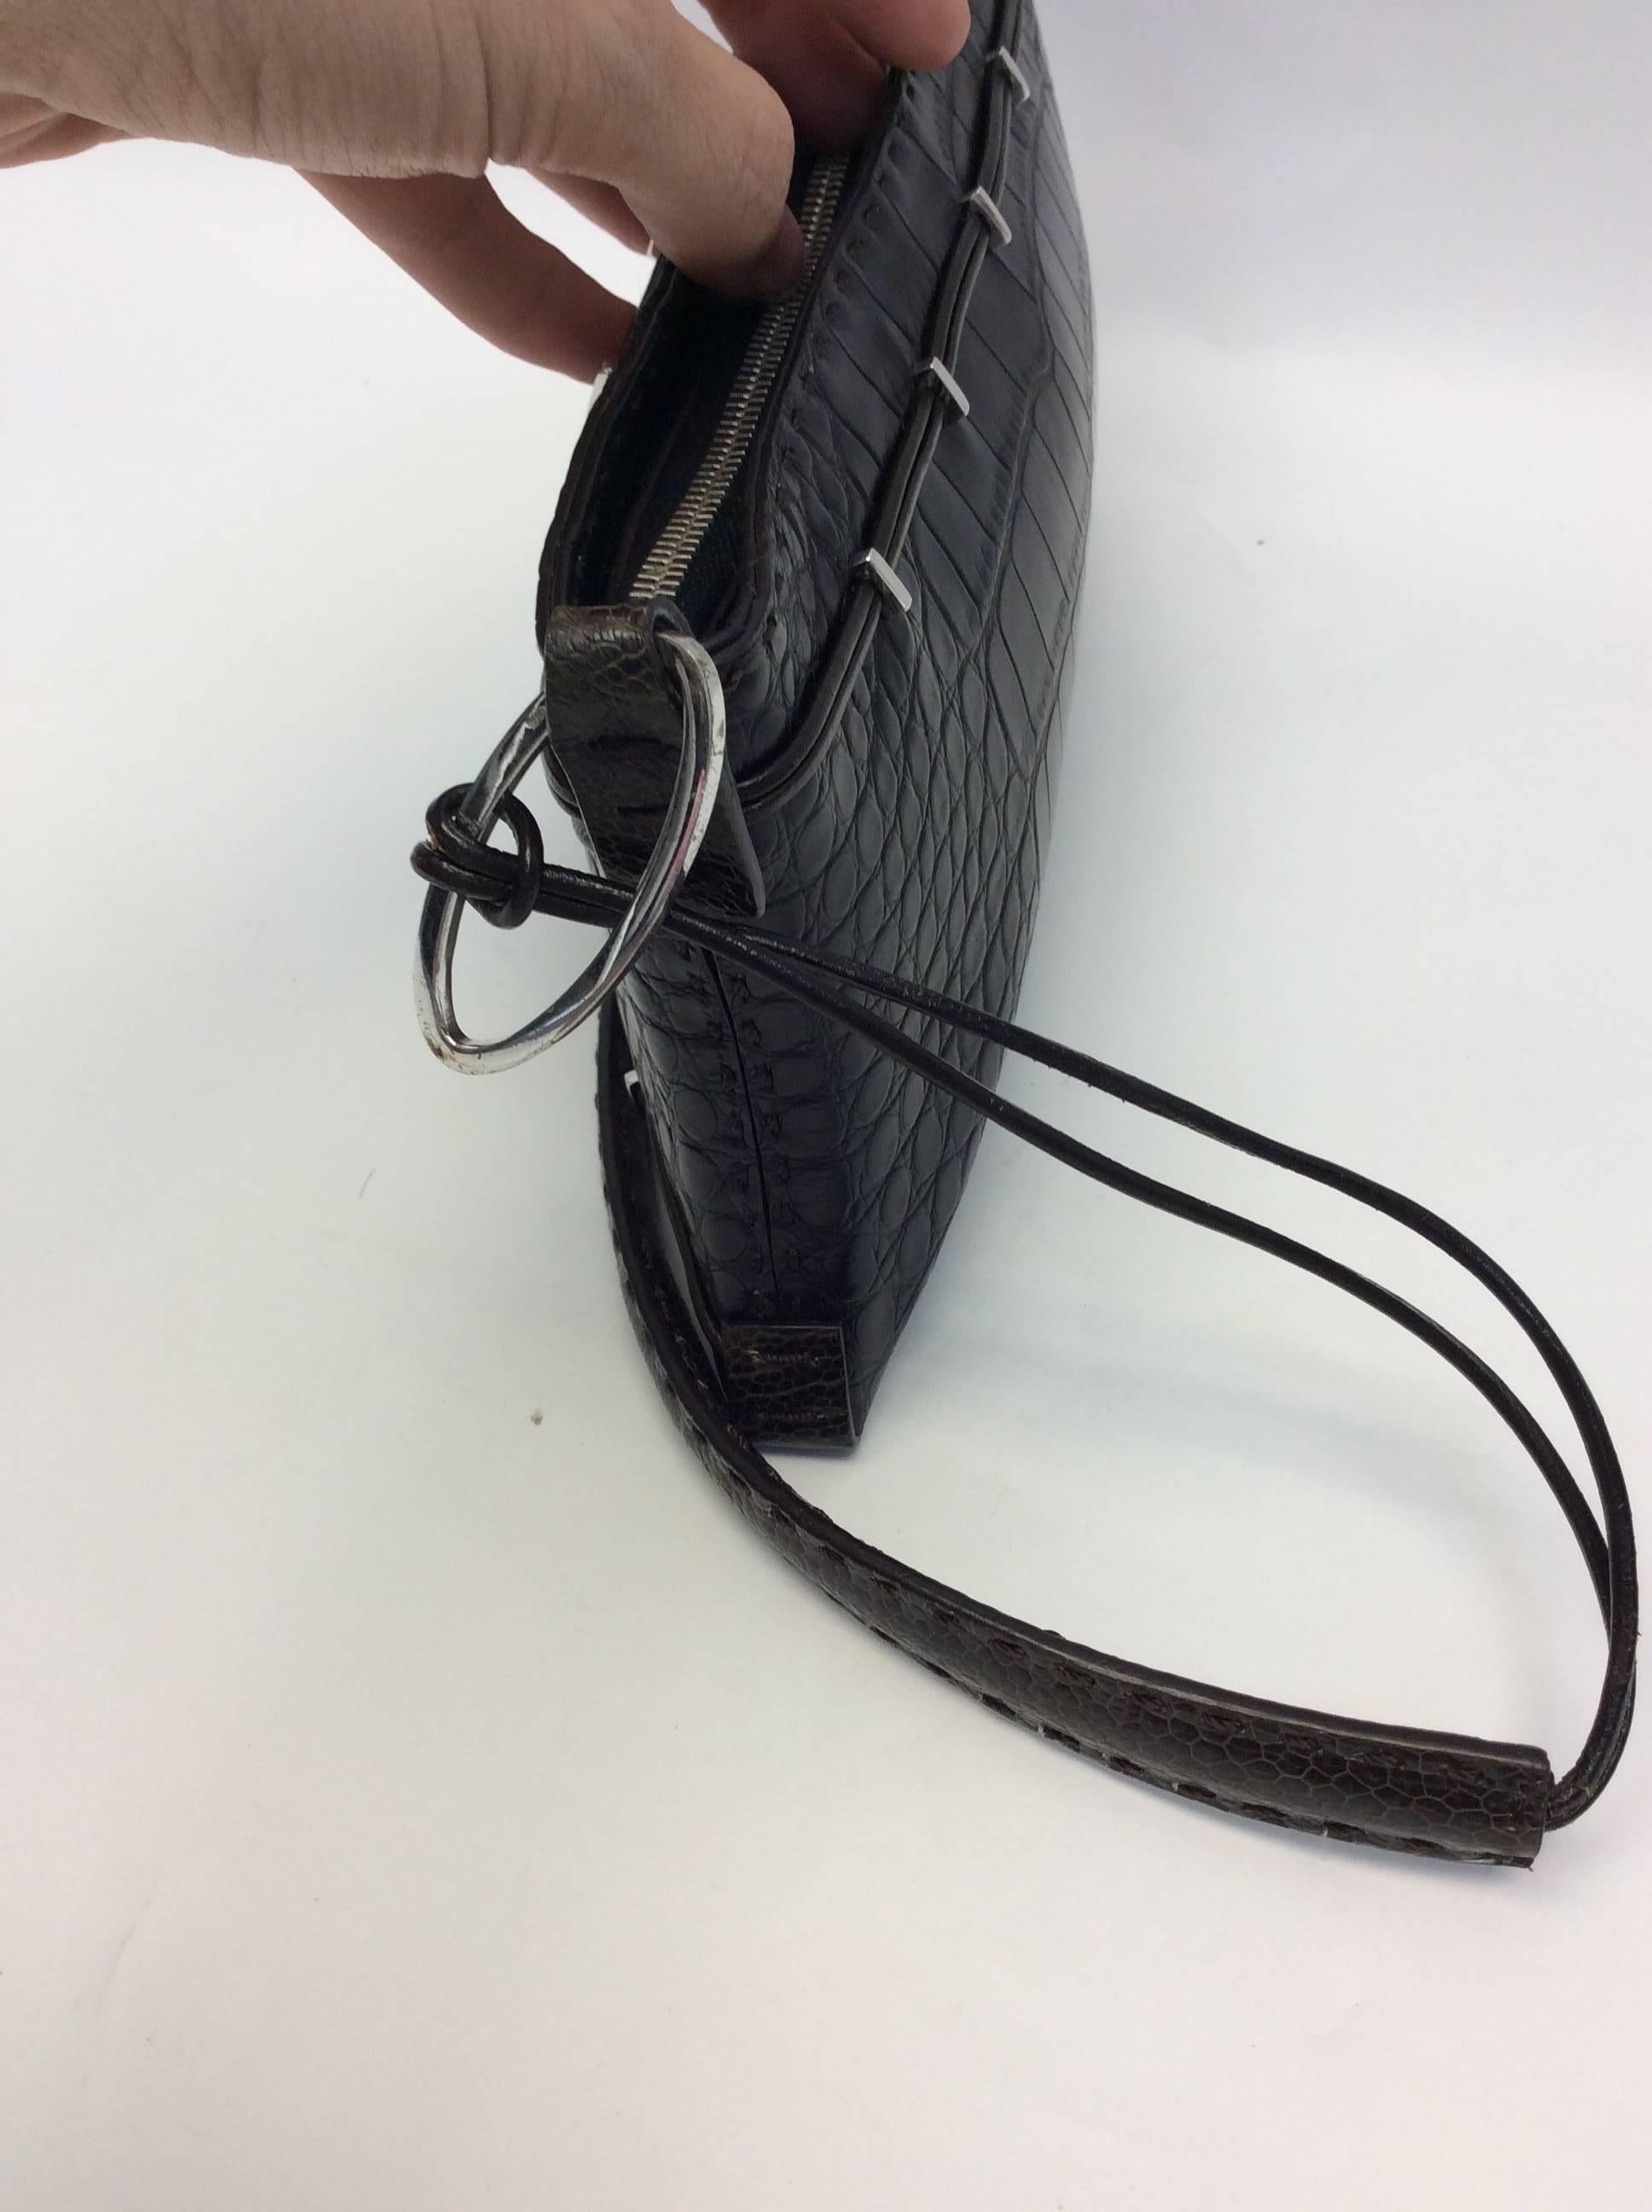 Molly Small Leather Should Strap Purse
Silver metal detailing on exterior
Interior fully lined
Made in Italy
$150
